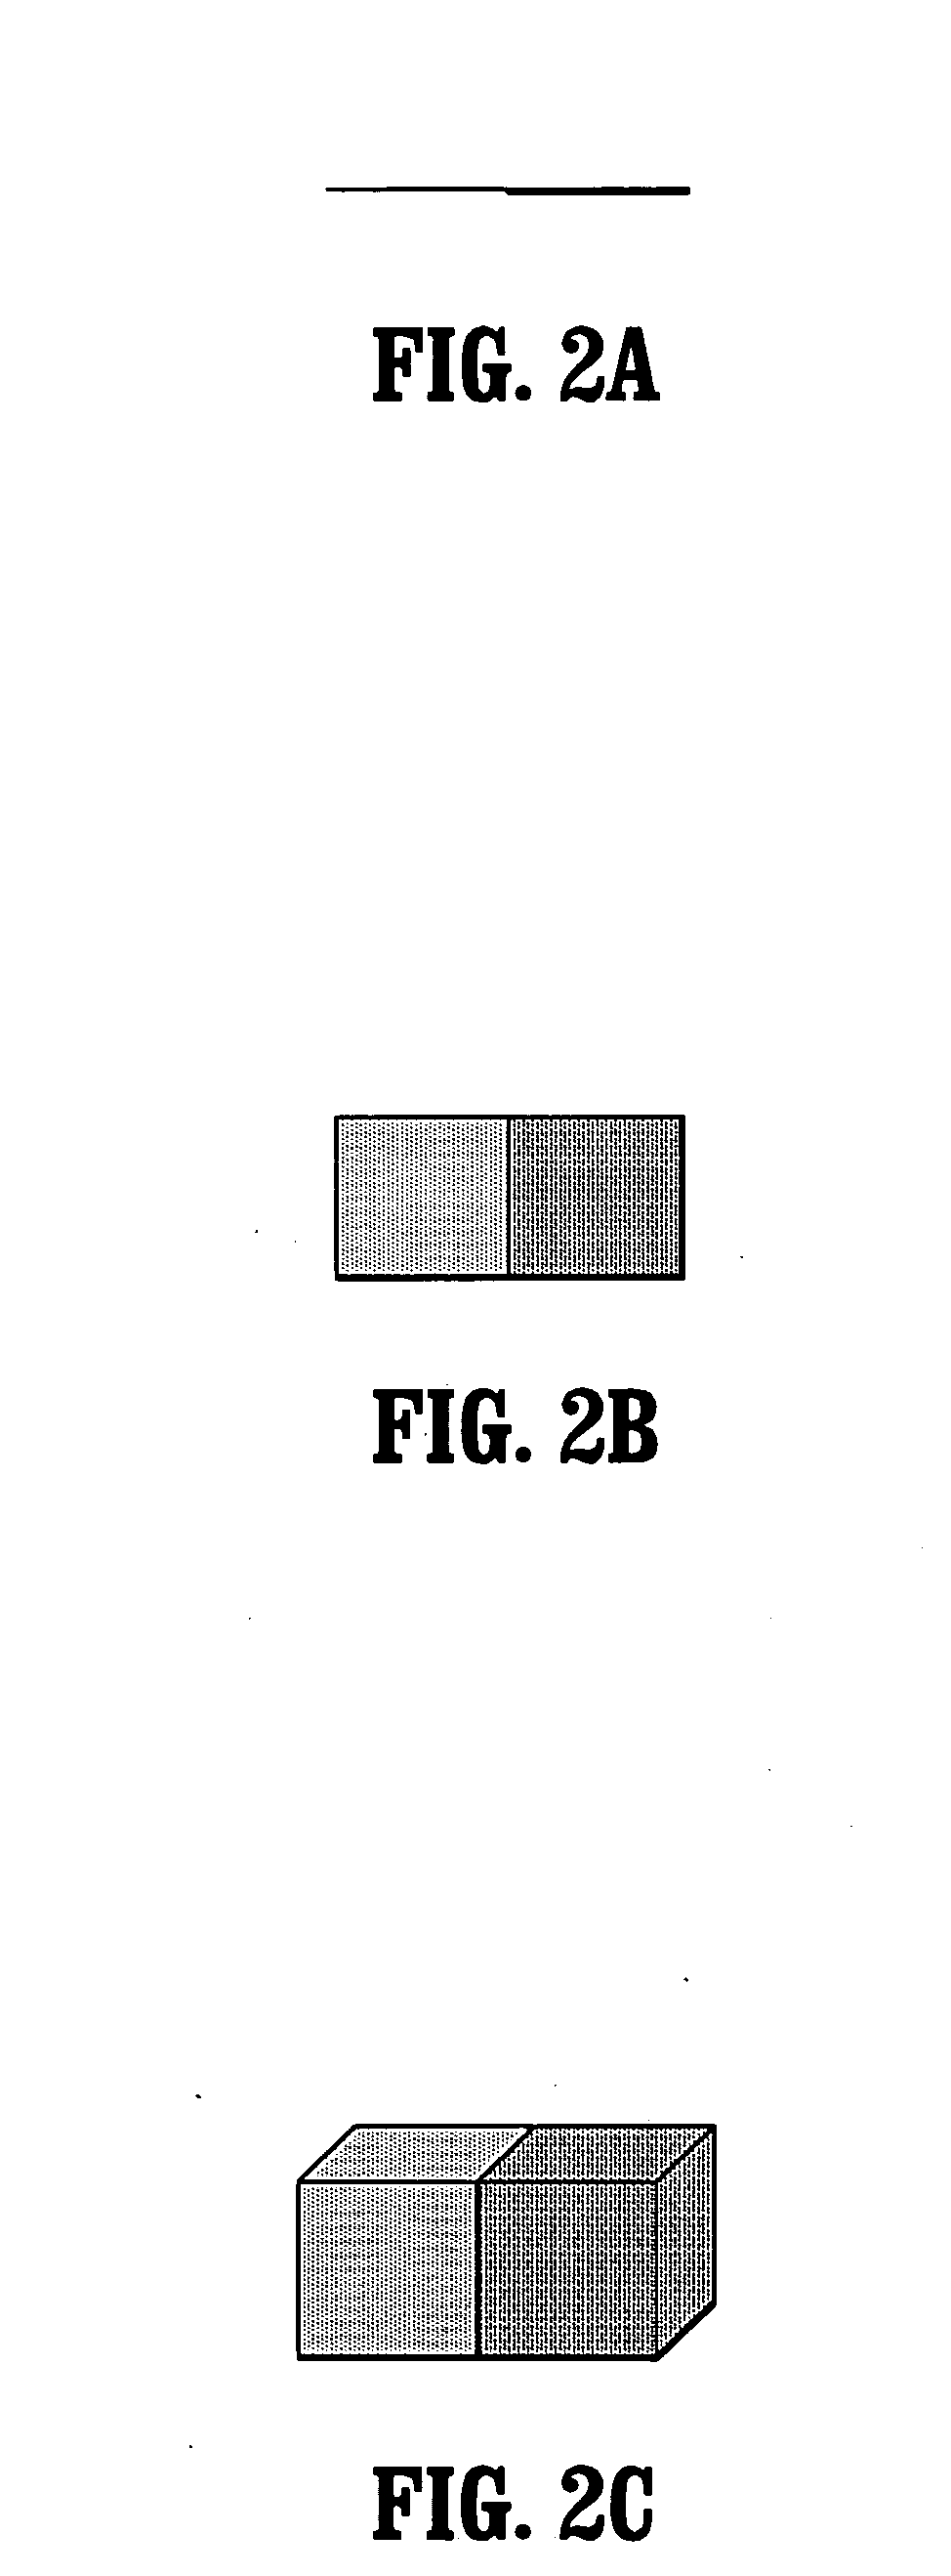 Methods and systems for 3D object detection using learning